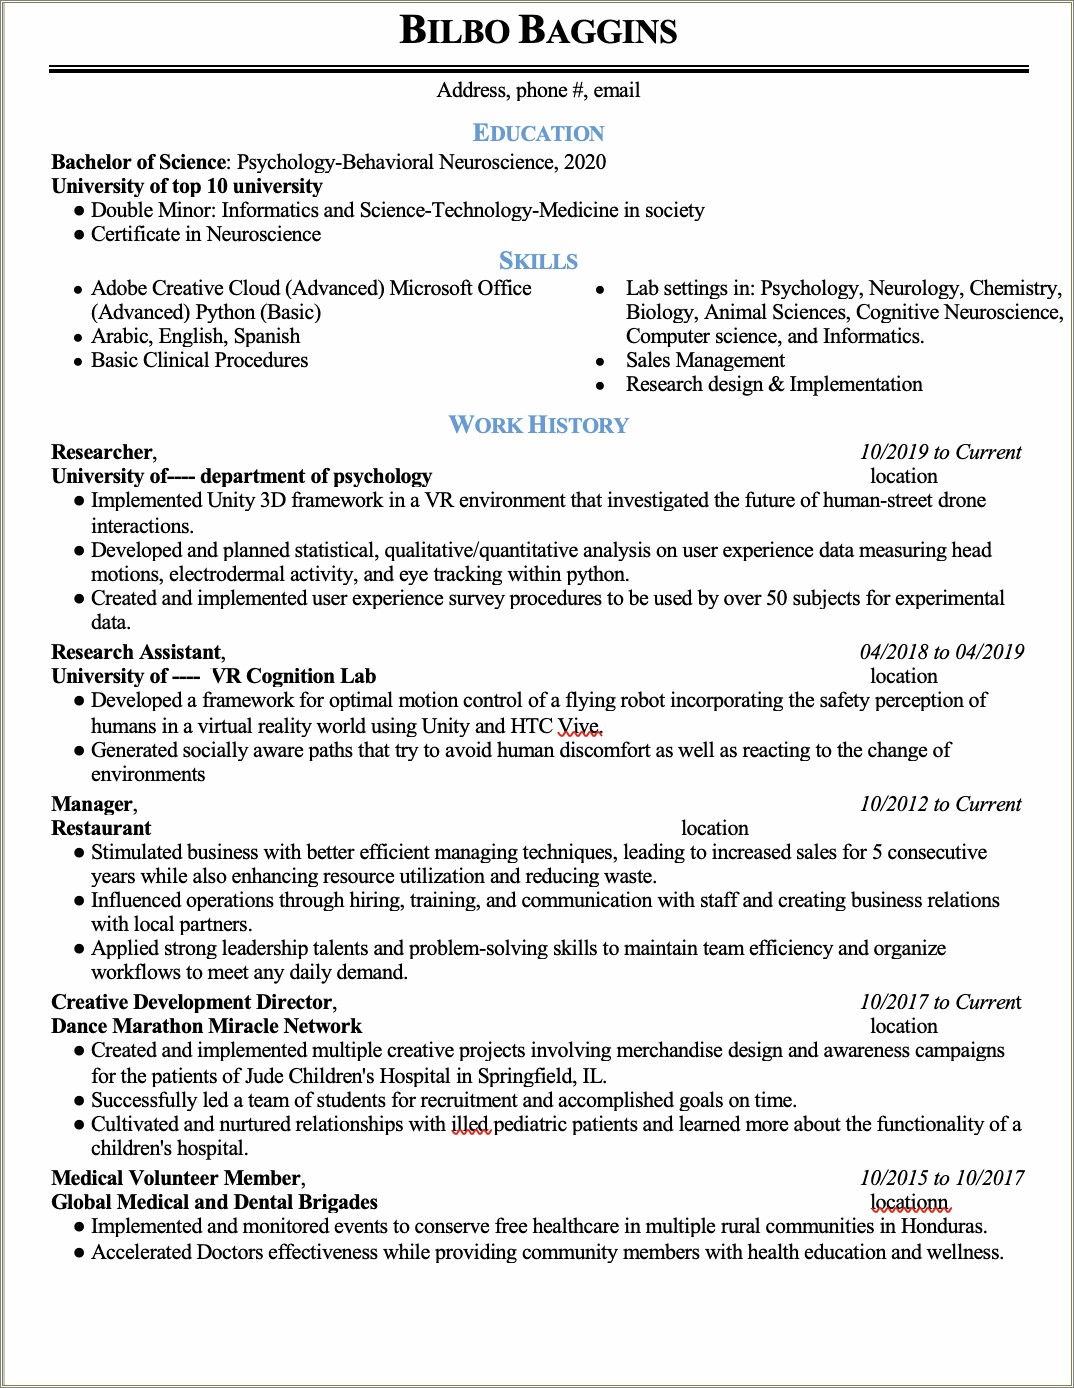 Resumes For Over 50 Looking For A Job